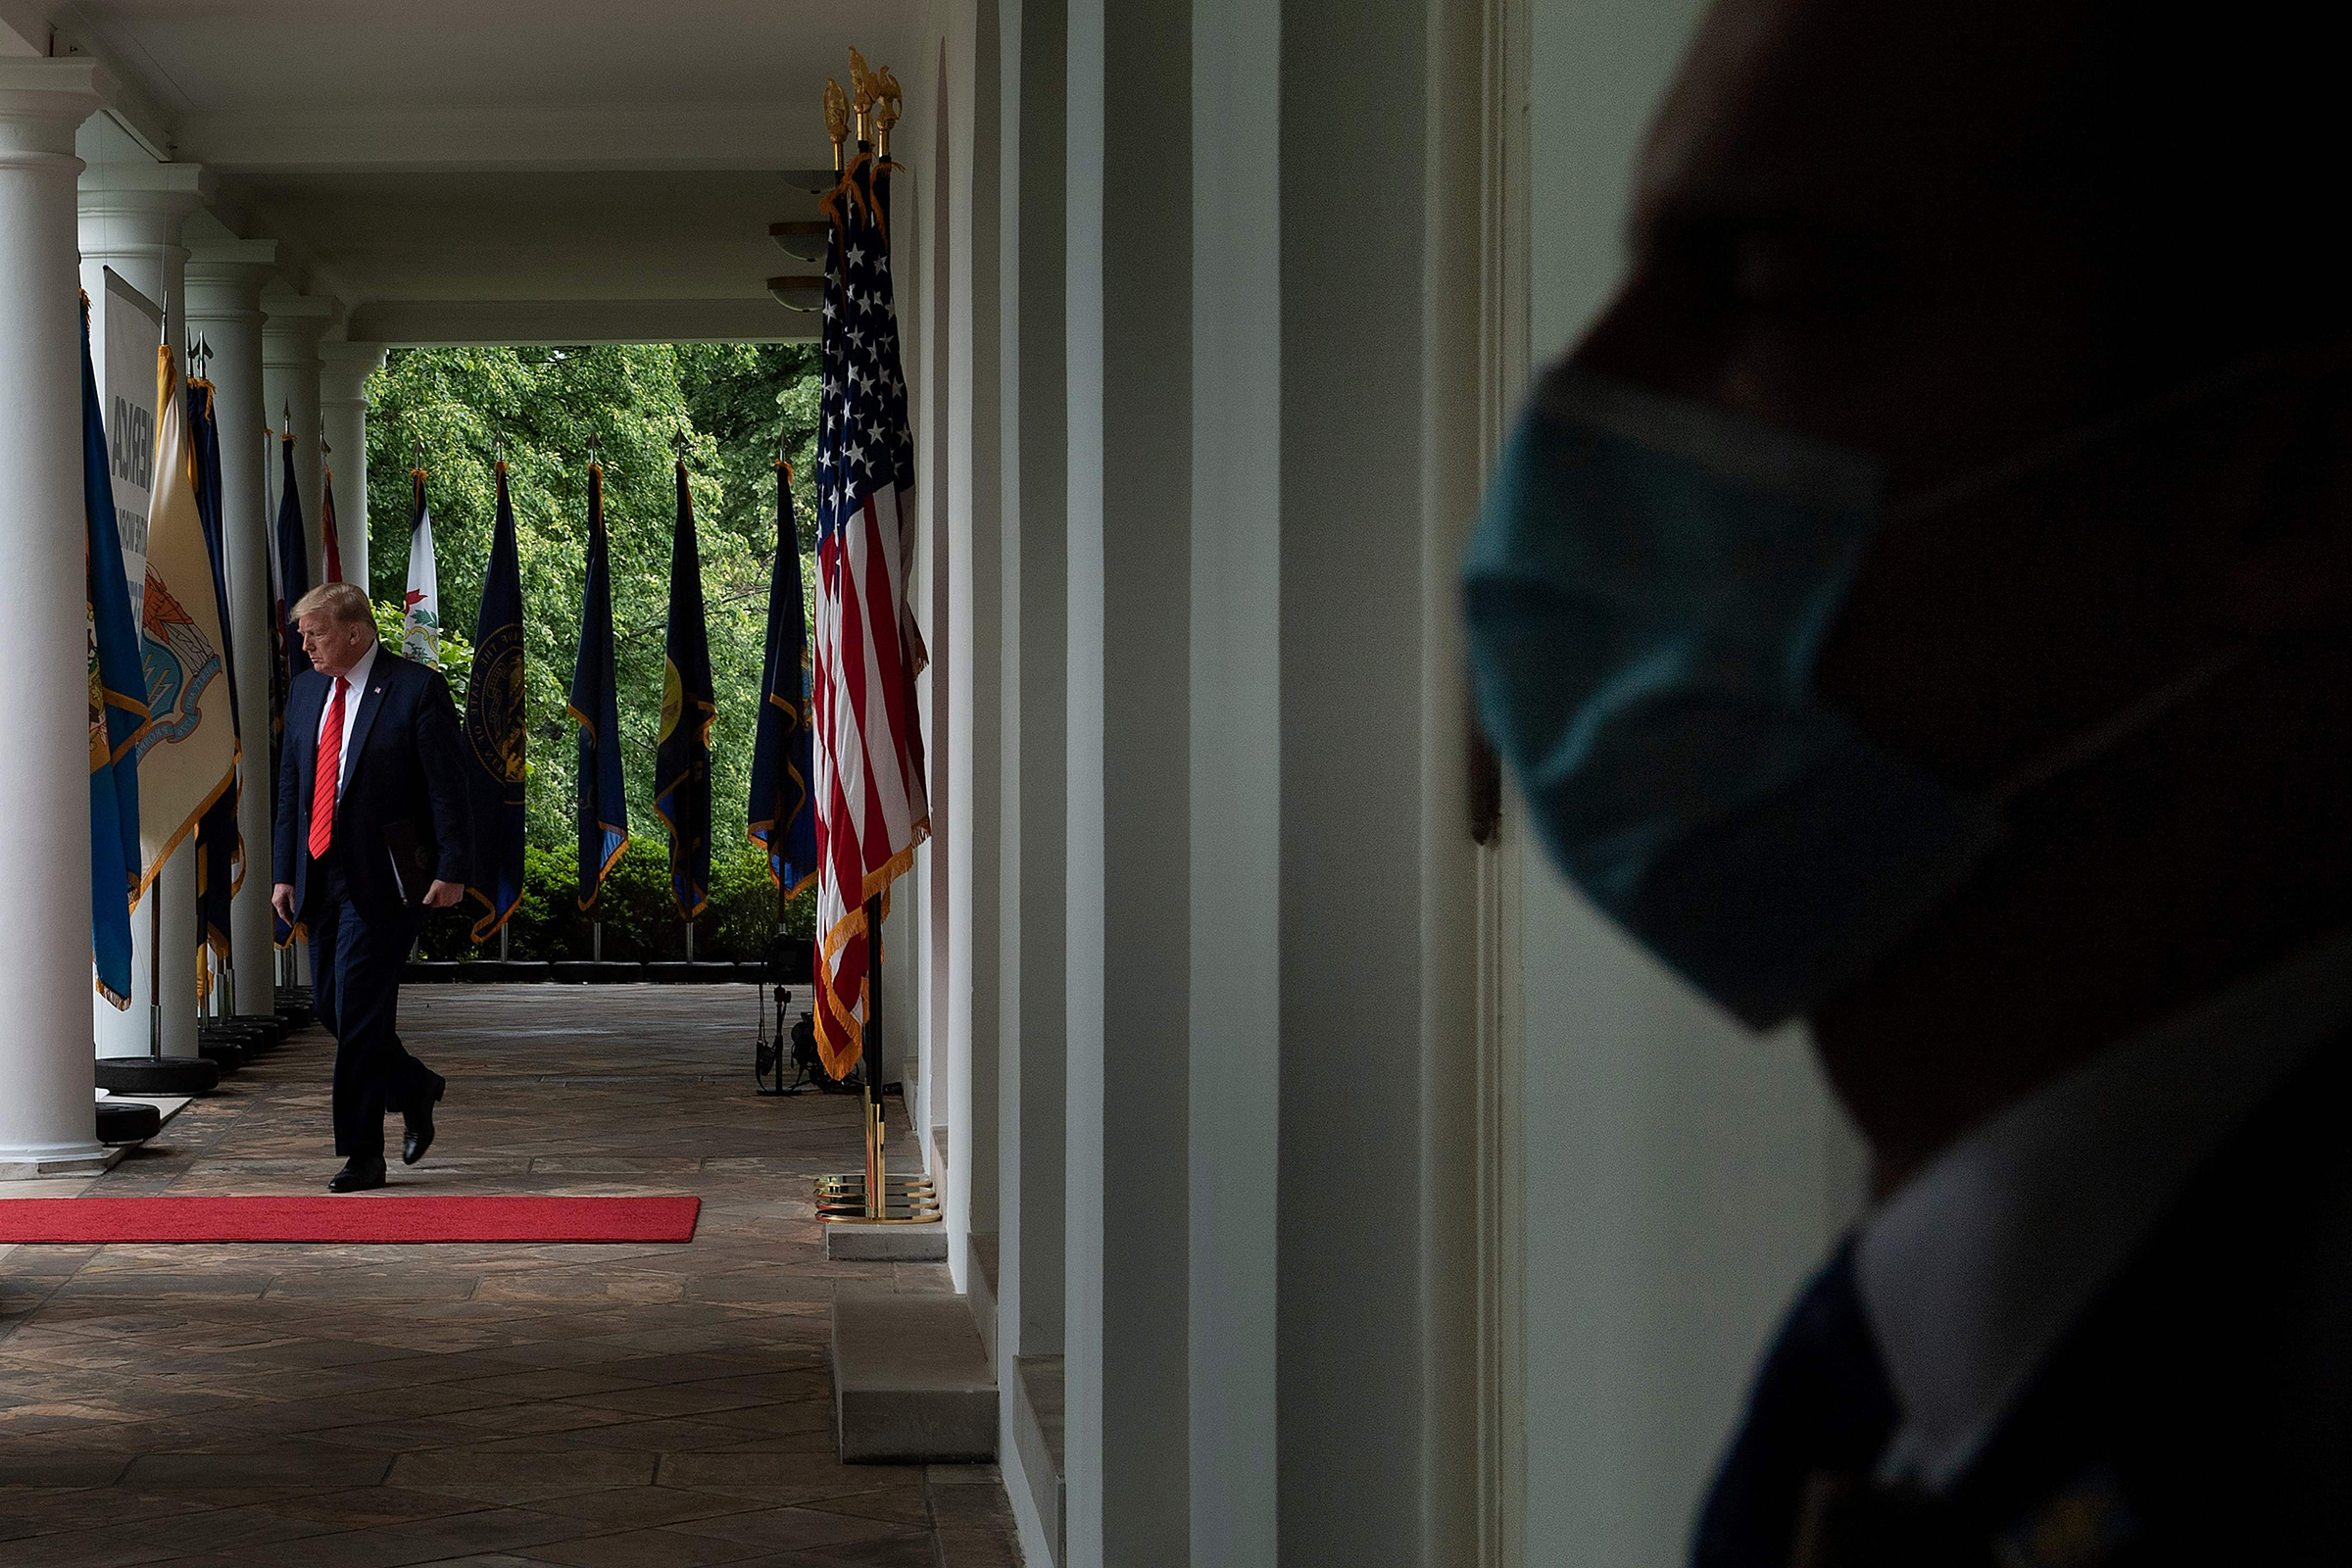 President Trump arrives at a news conference in the Rose Garden on May 11 wearing no mask, despite CDC guidelines advising Americans to use them (Brendan Smialowski—AFP/Getty Images)